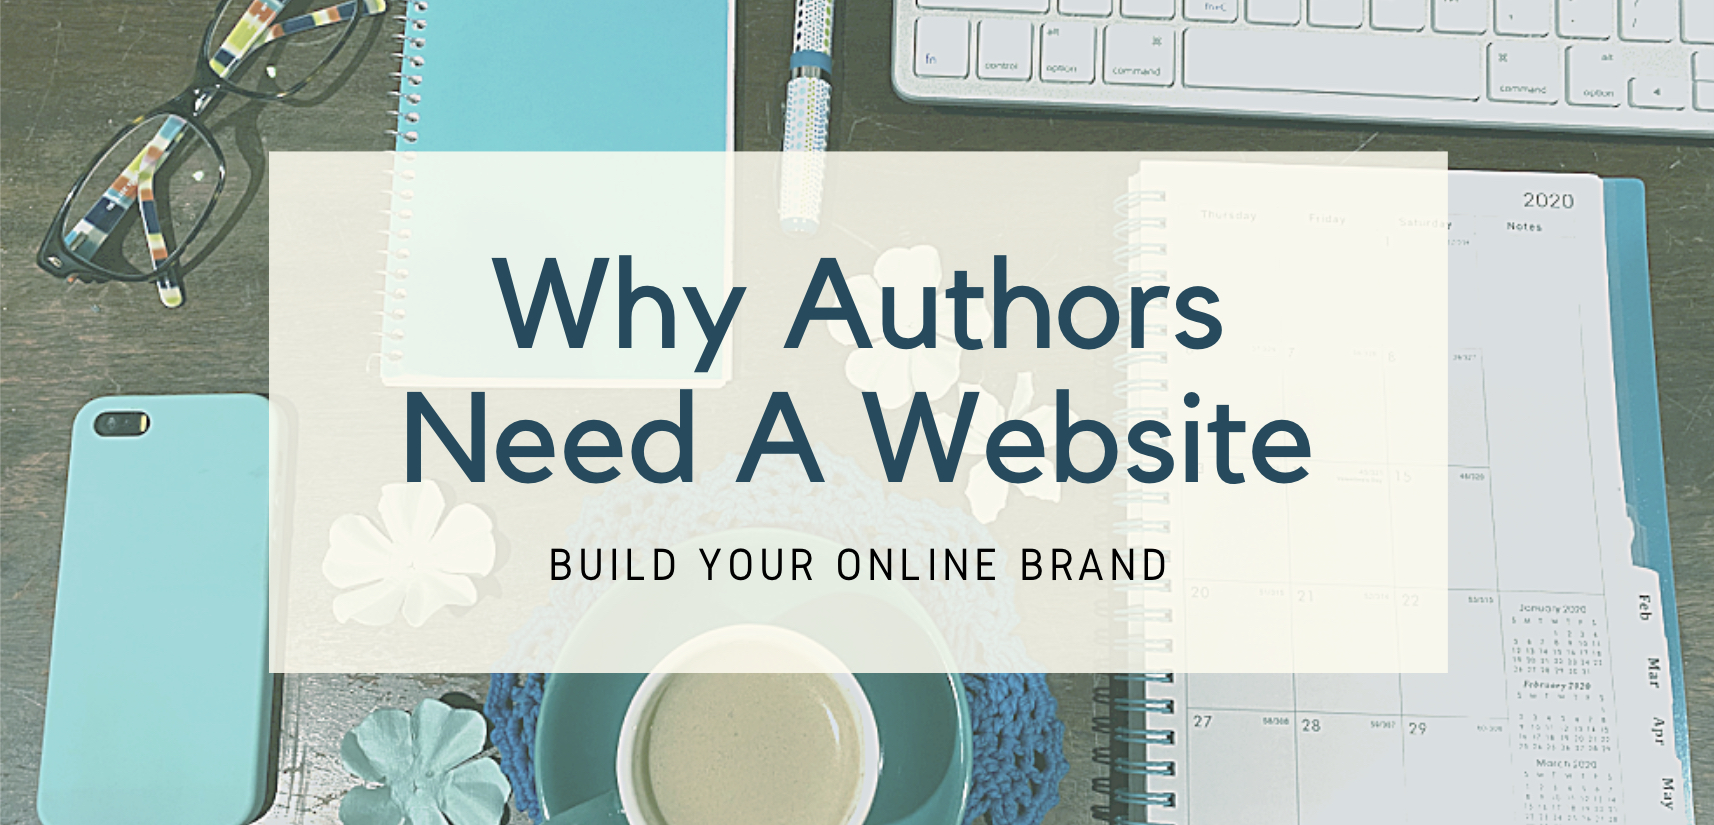 Why Authors Need a Website